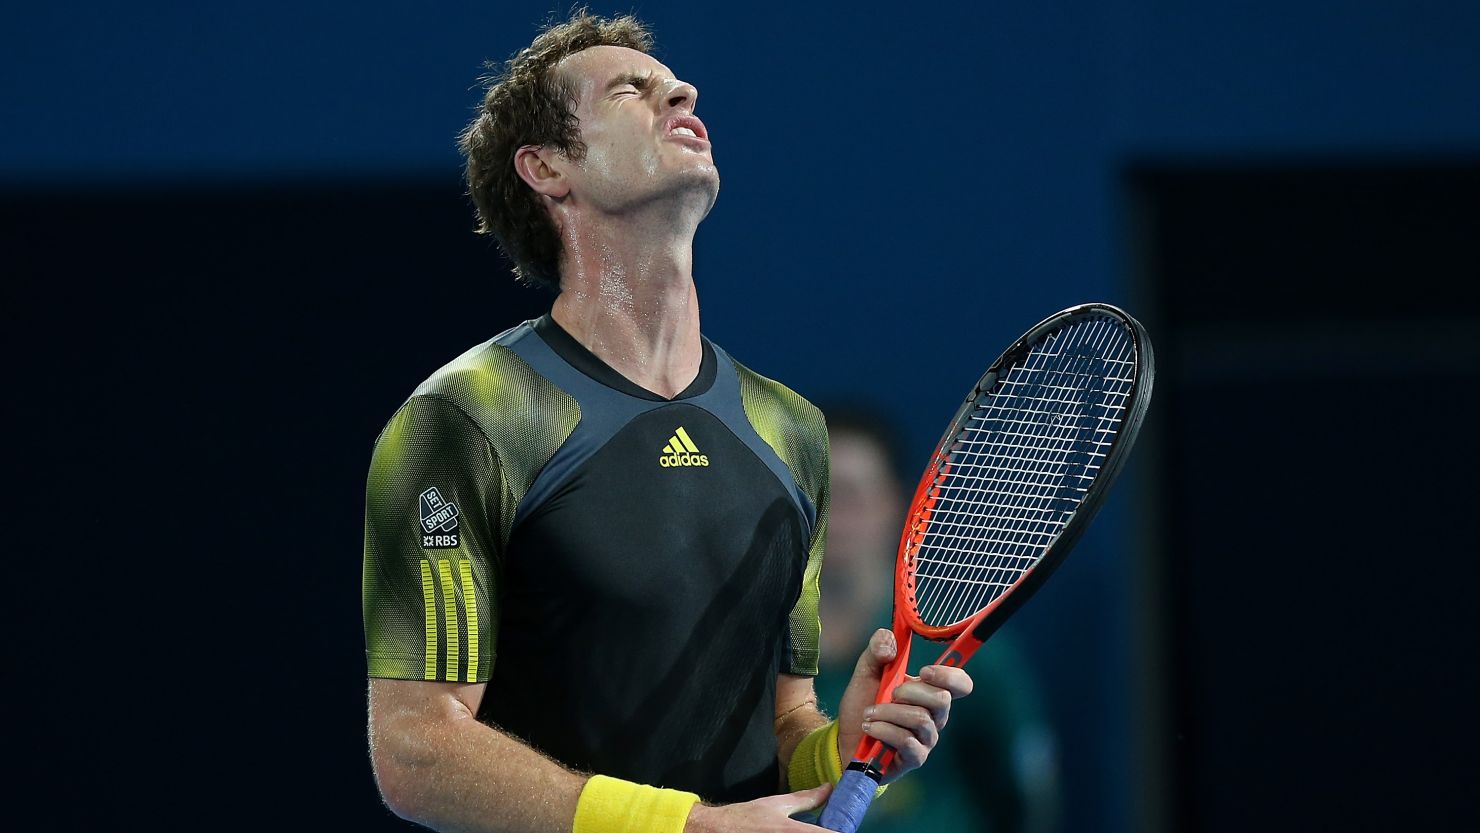 Andy Murray found it tough going in the heat at the Brisbane International on Thursday.